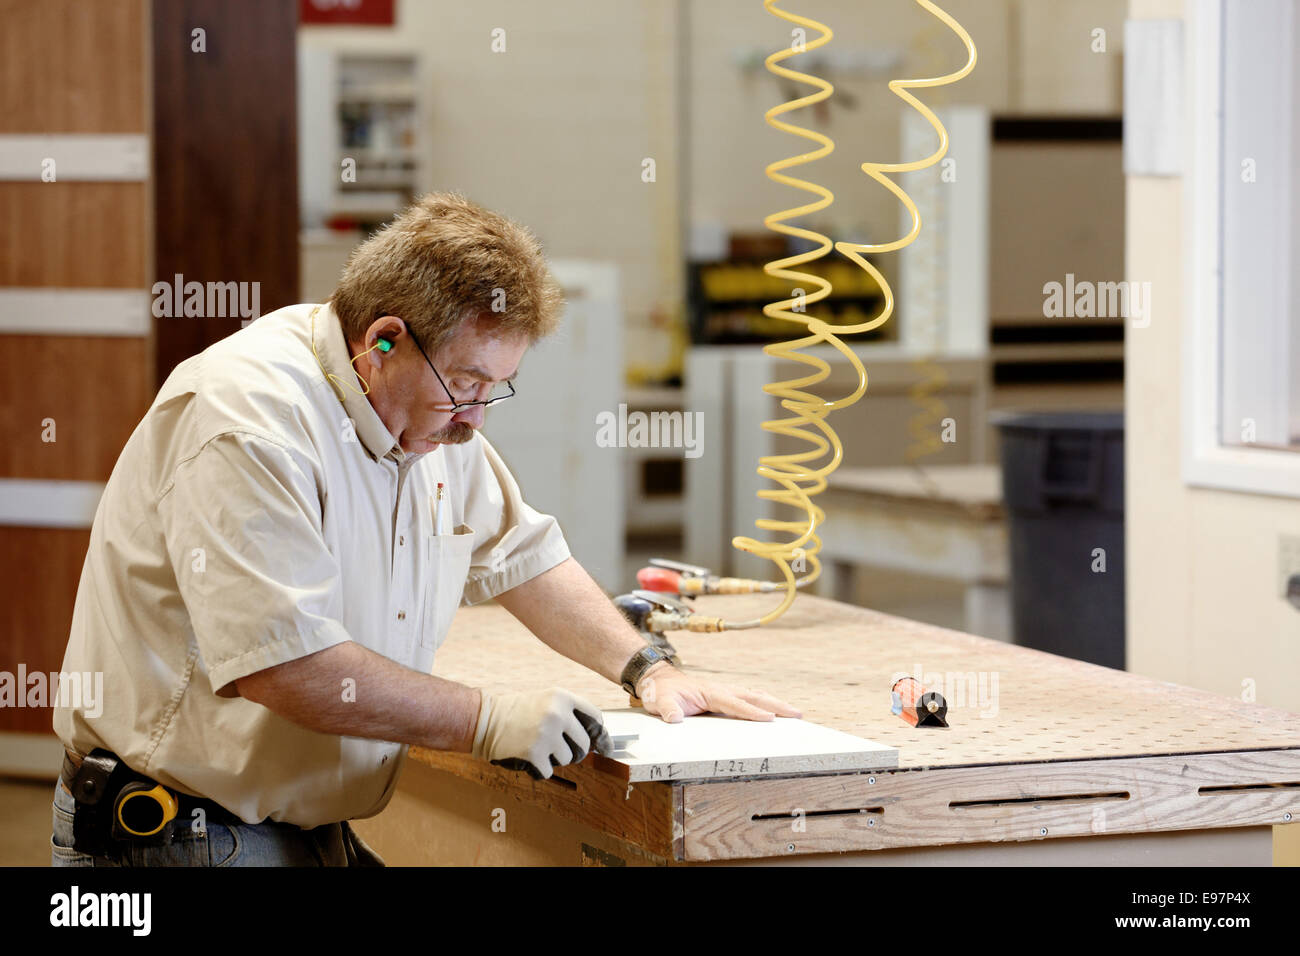 A carpenter trimming the edge banding of new cabinet doors. Stock Photo